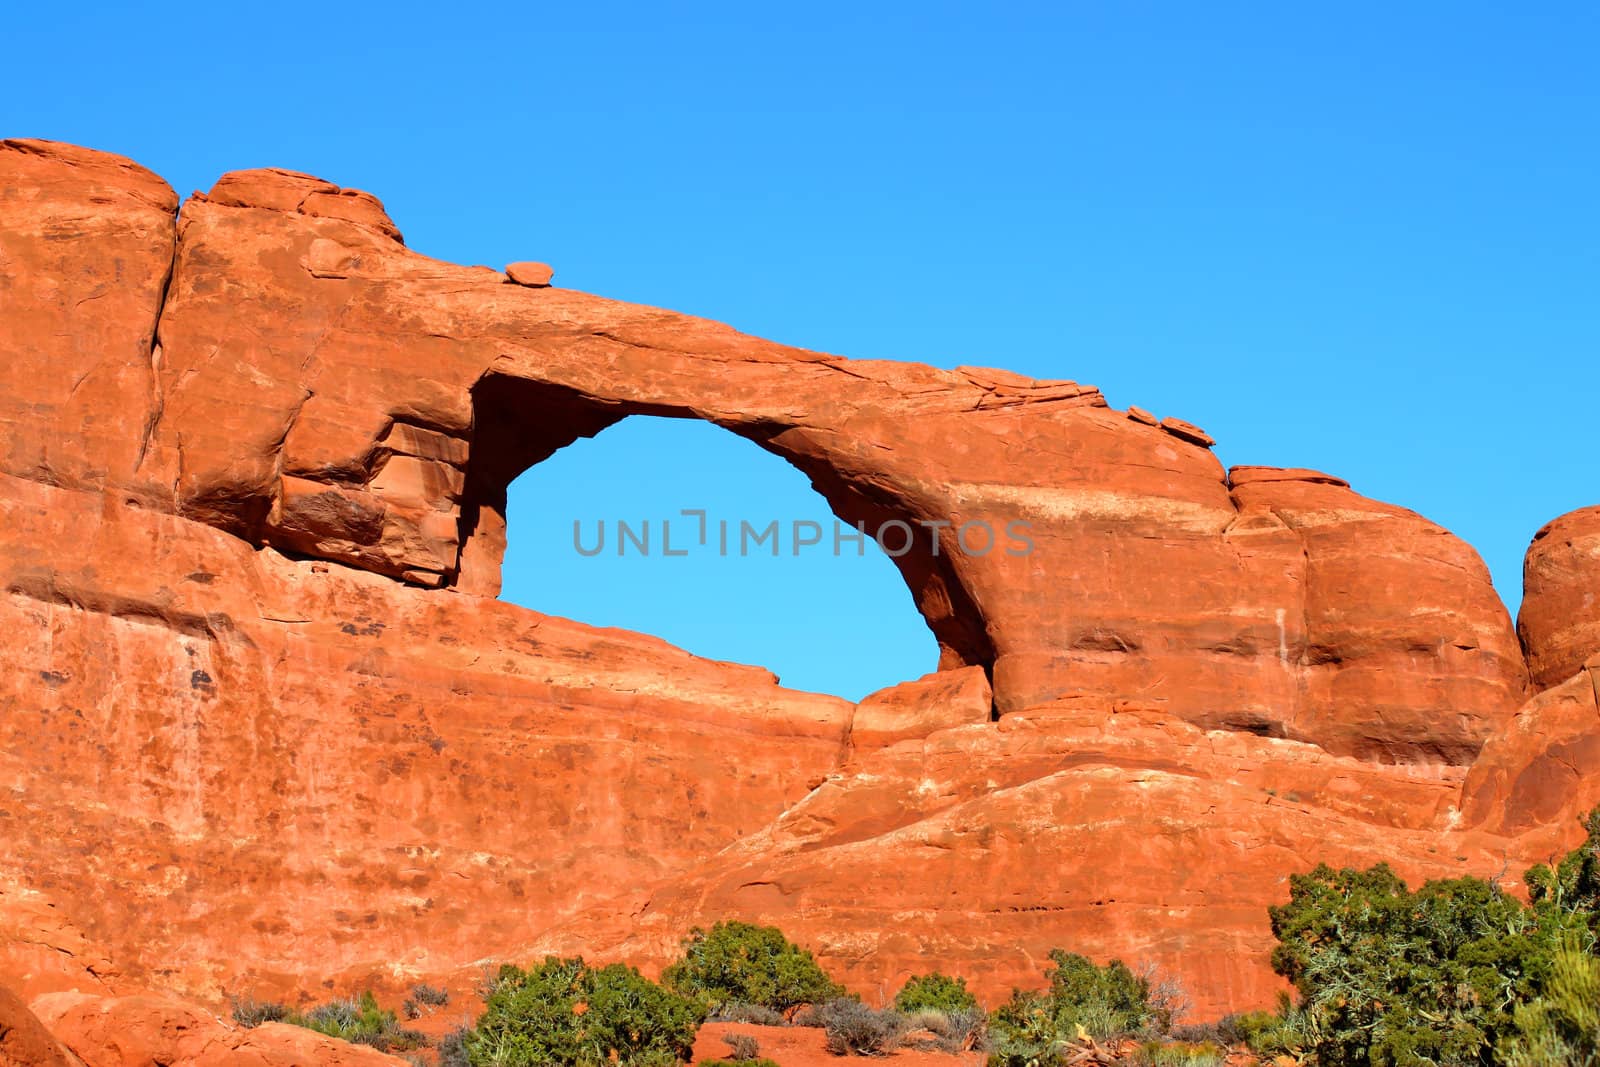 Skyline Arch stretches over a rocky landscape at Arches National Park of Utah.